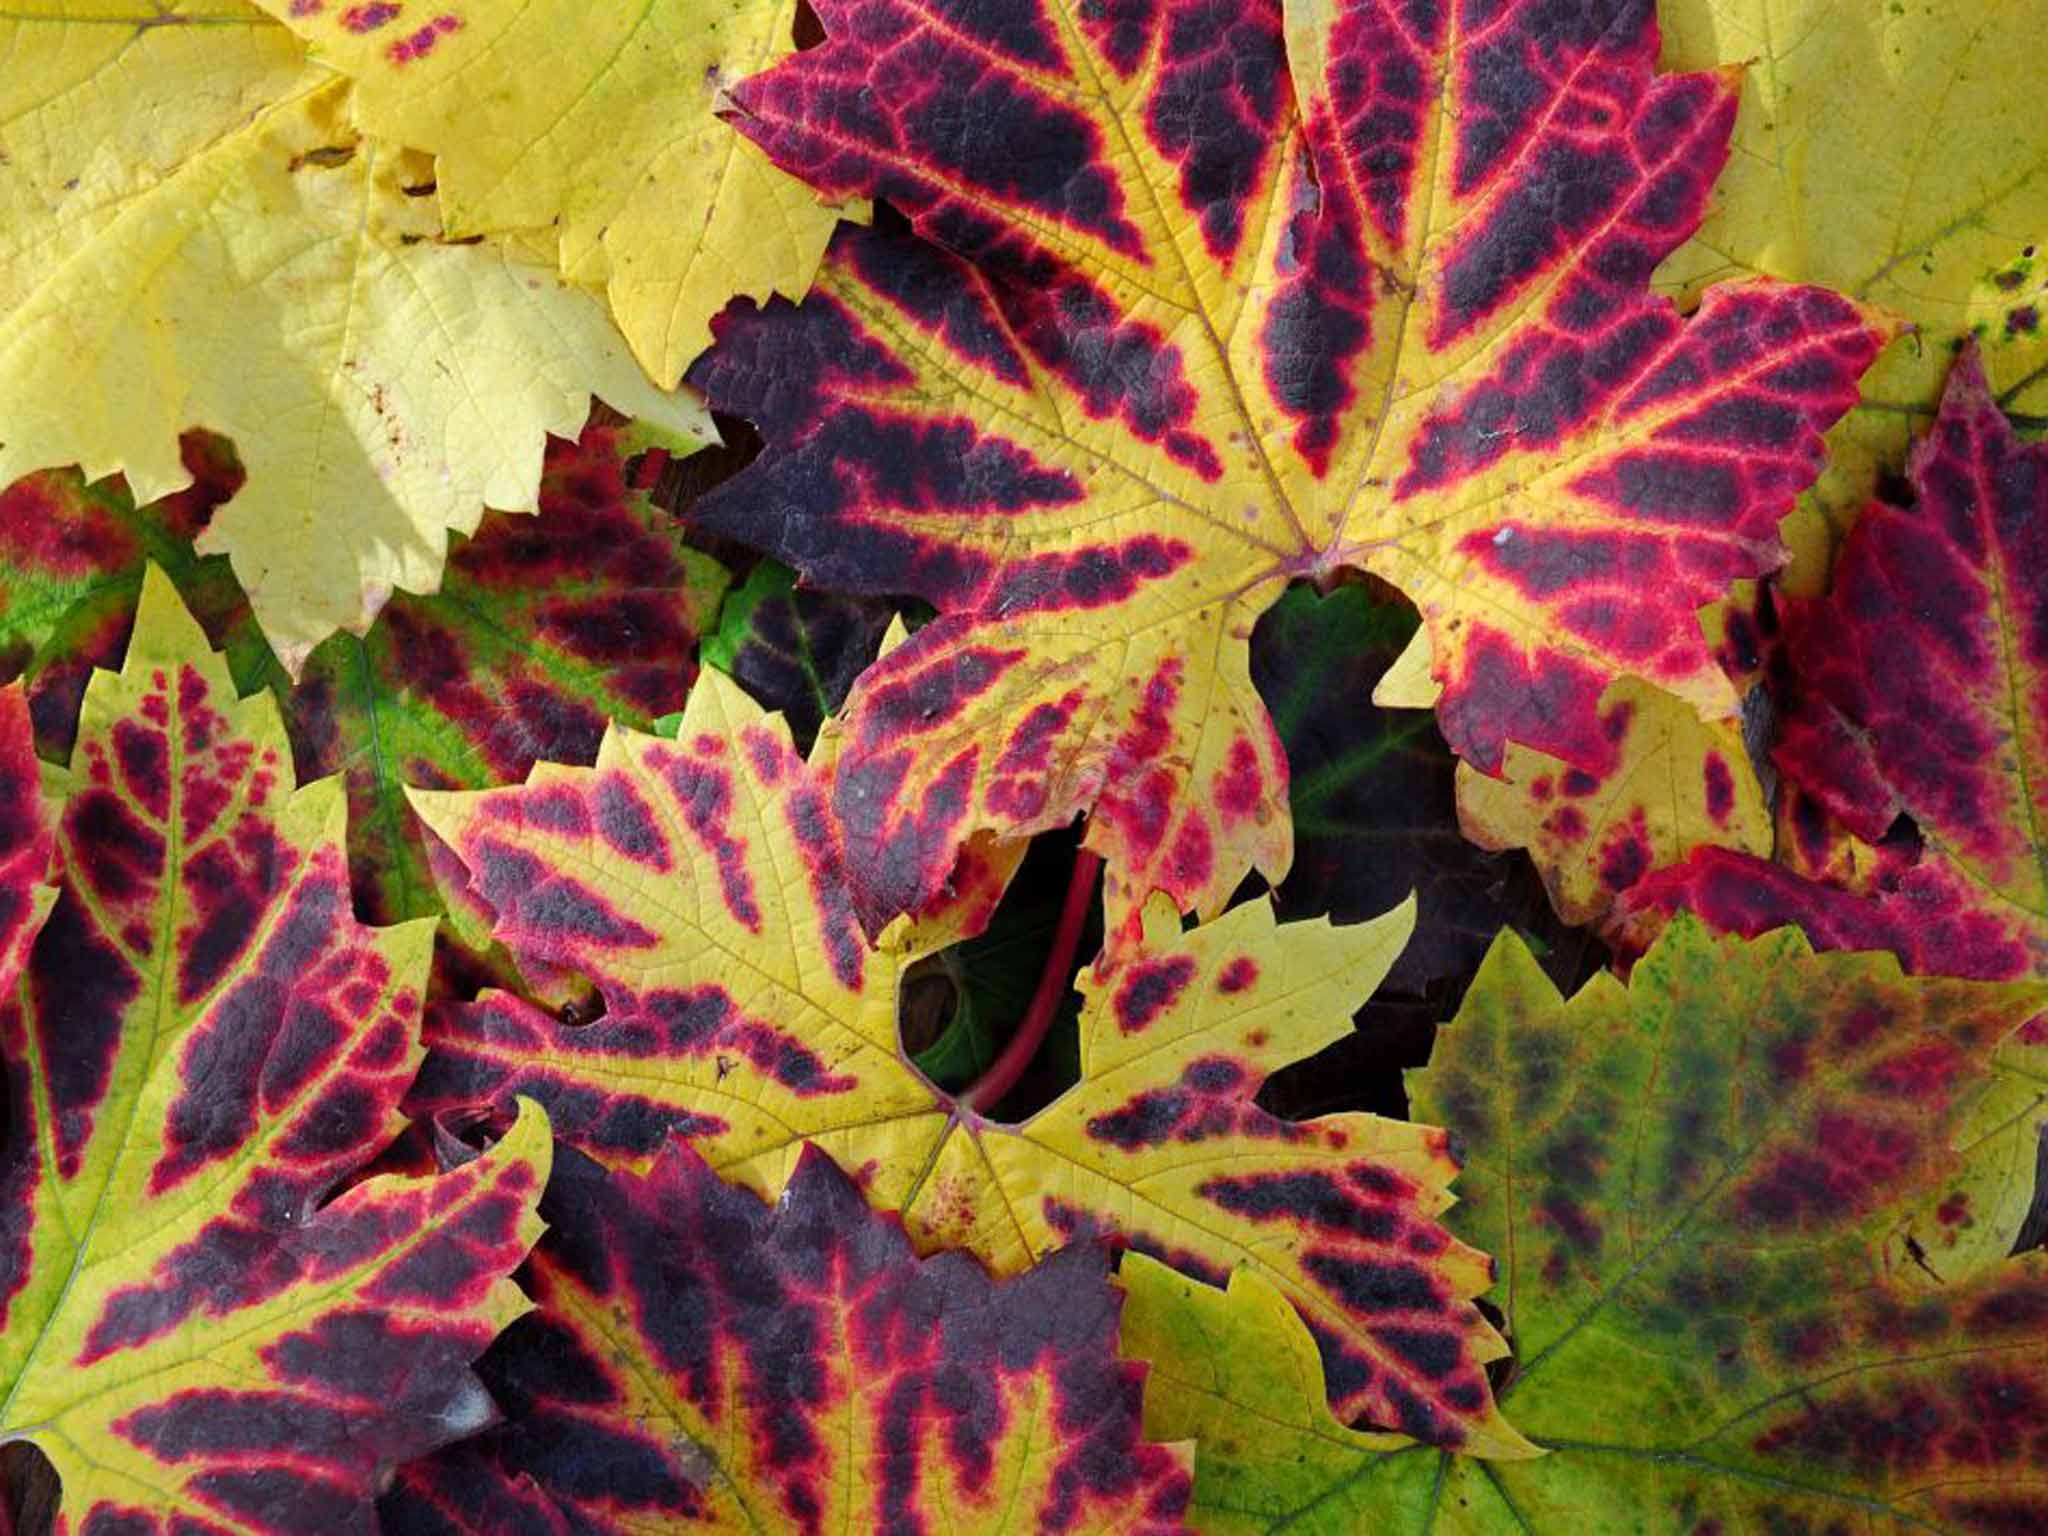 The fiery autumn leaves of 'Brant'